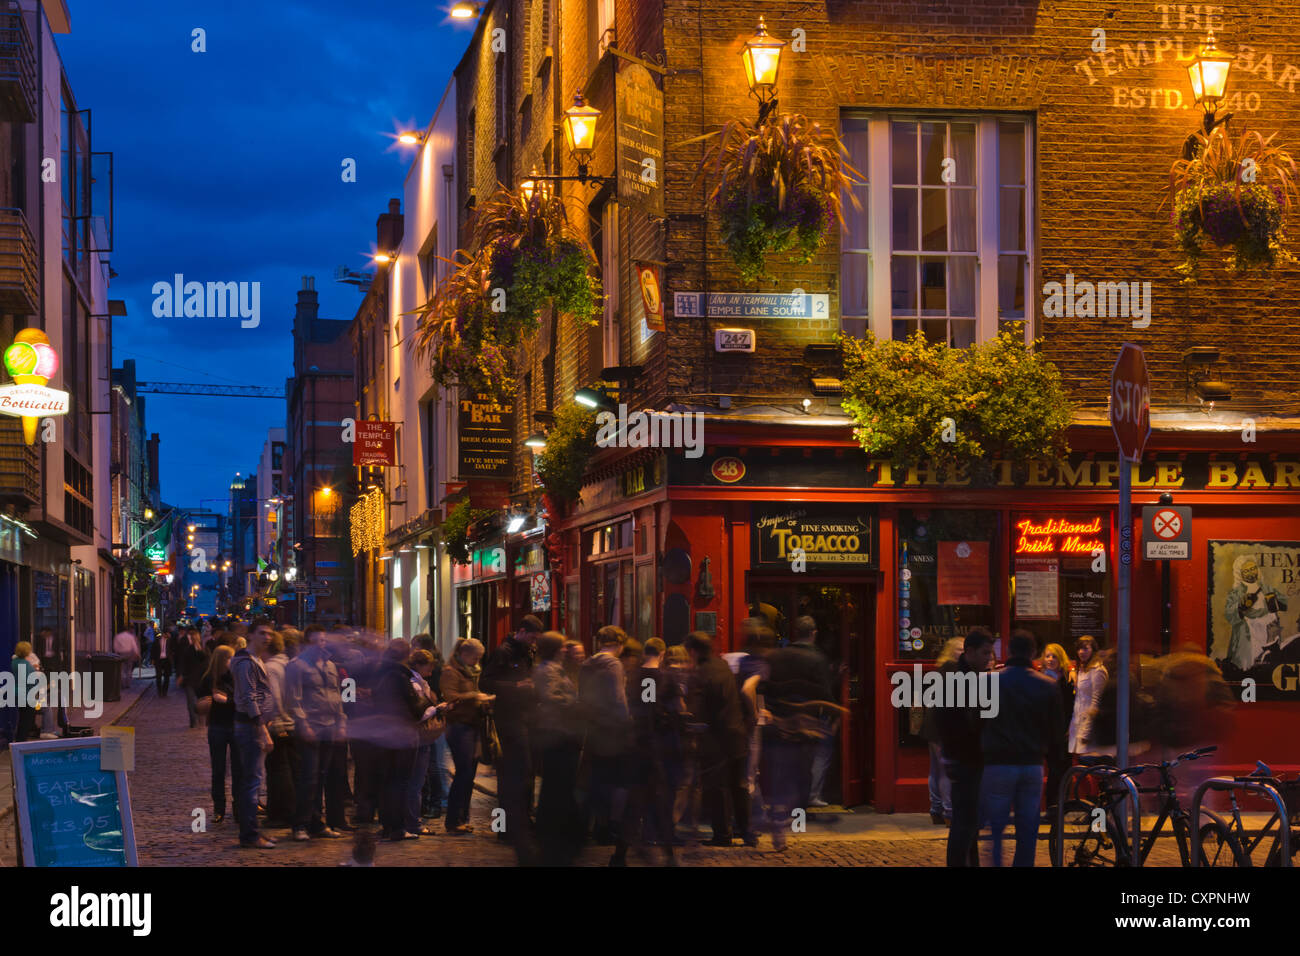 Night view of traditional house in the pedestrian street, Dublin, Ireland, Europe Stock Photo